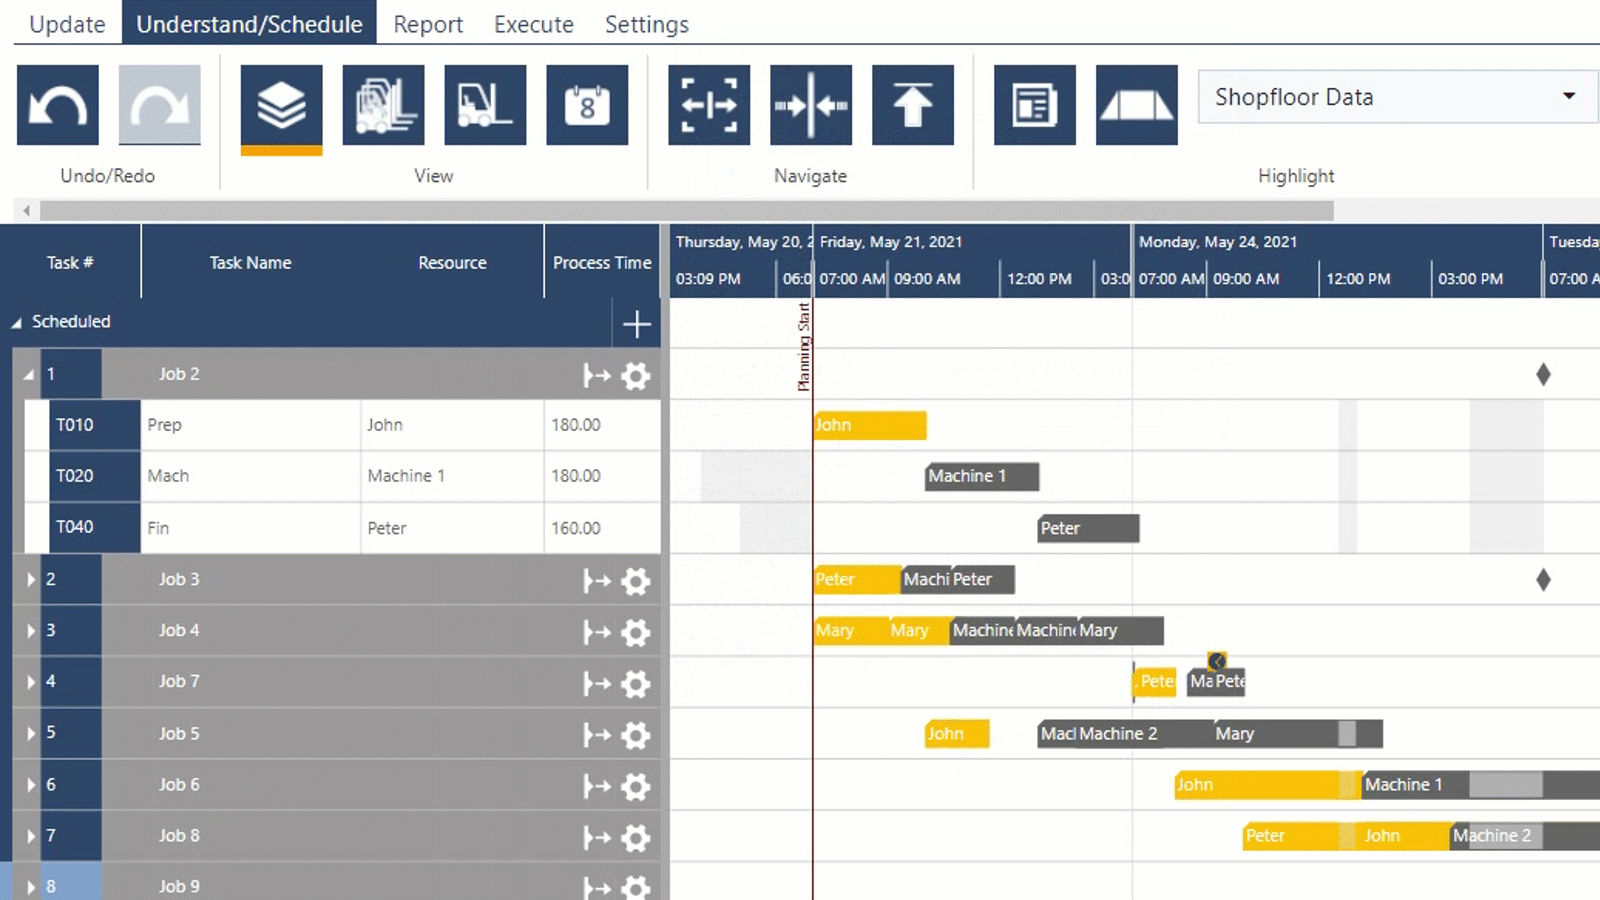 Digital planning board for HMLV - key feature - allocate resource with special skills